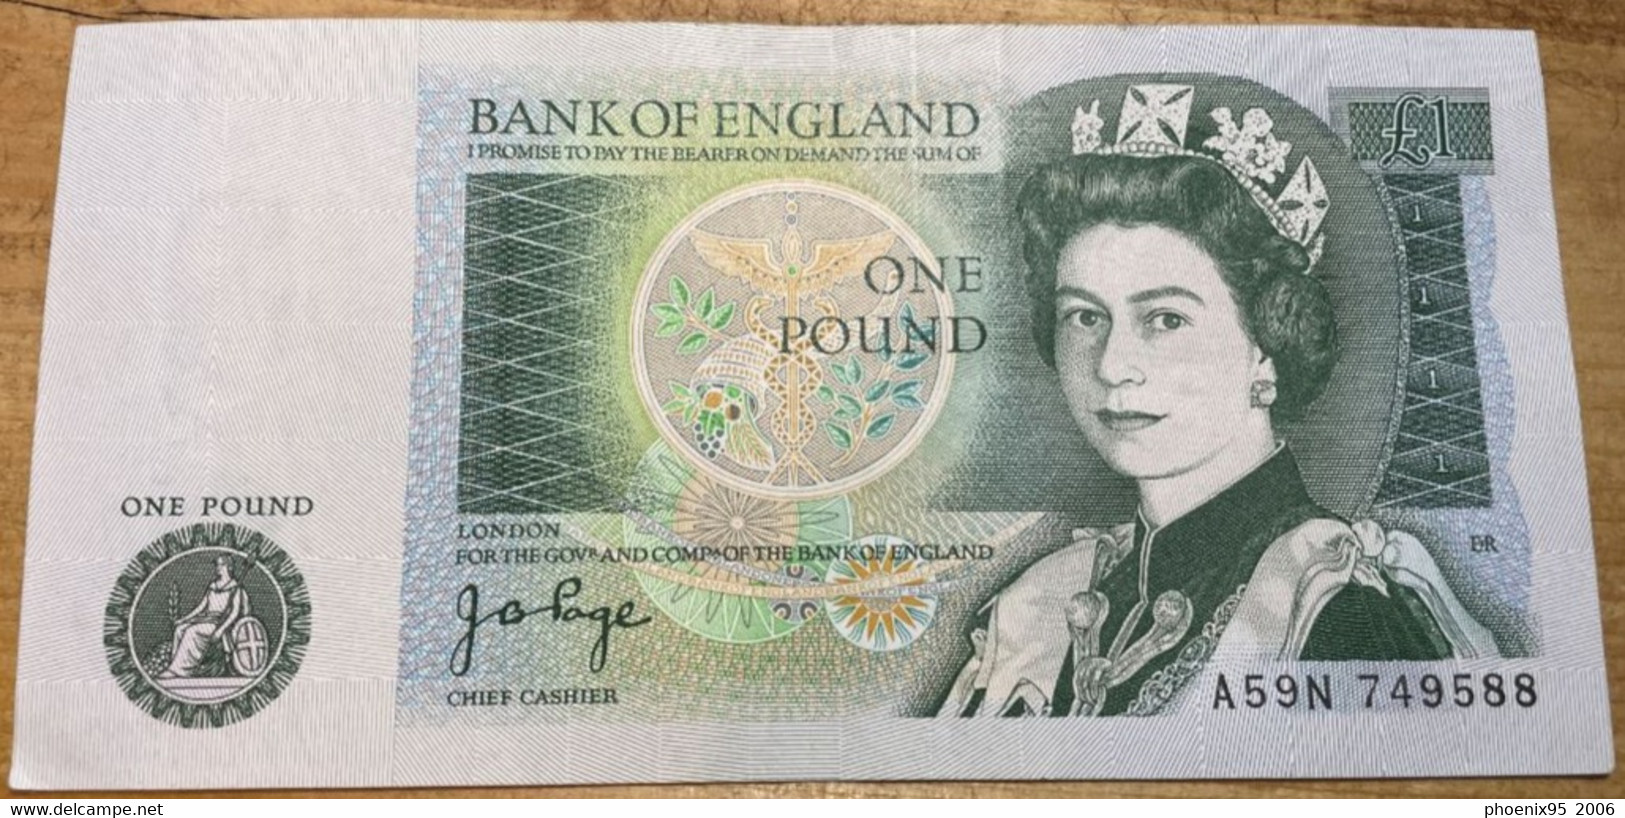 Bank Of England £1 Note (A59N Series, JB Page) - Excellent Condition - 1 Pound